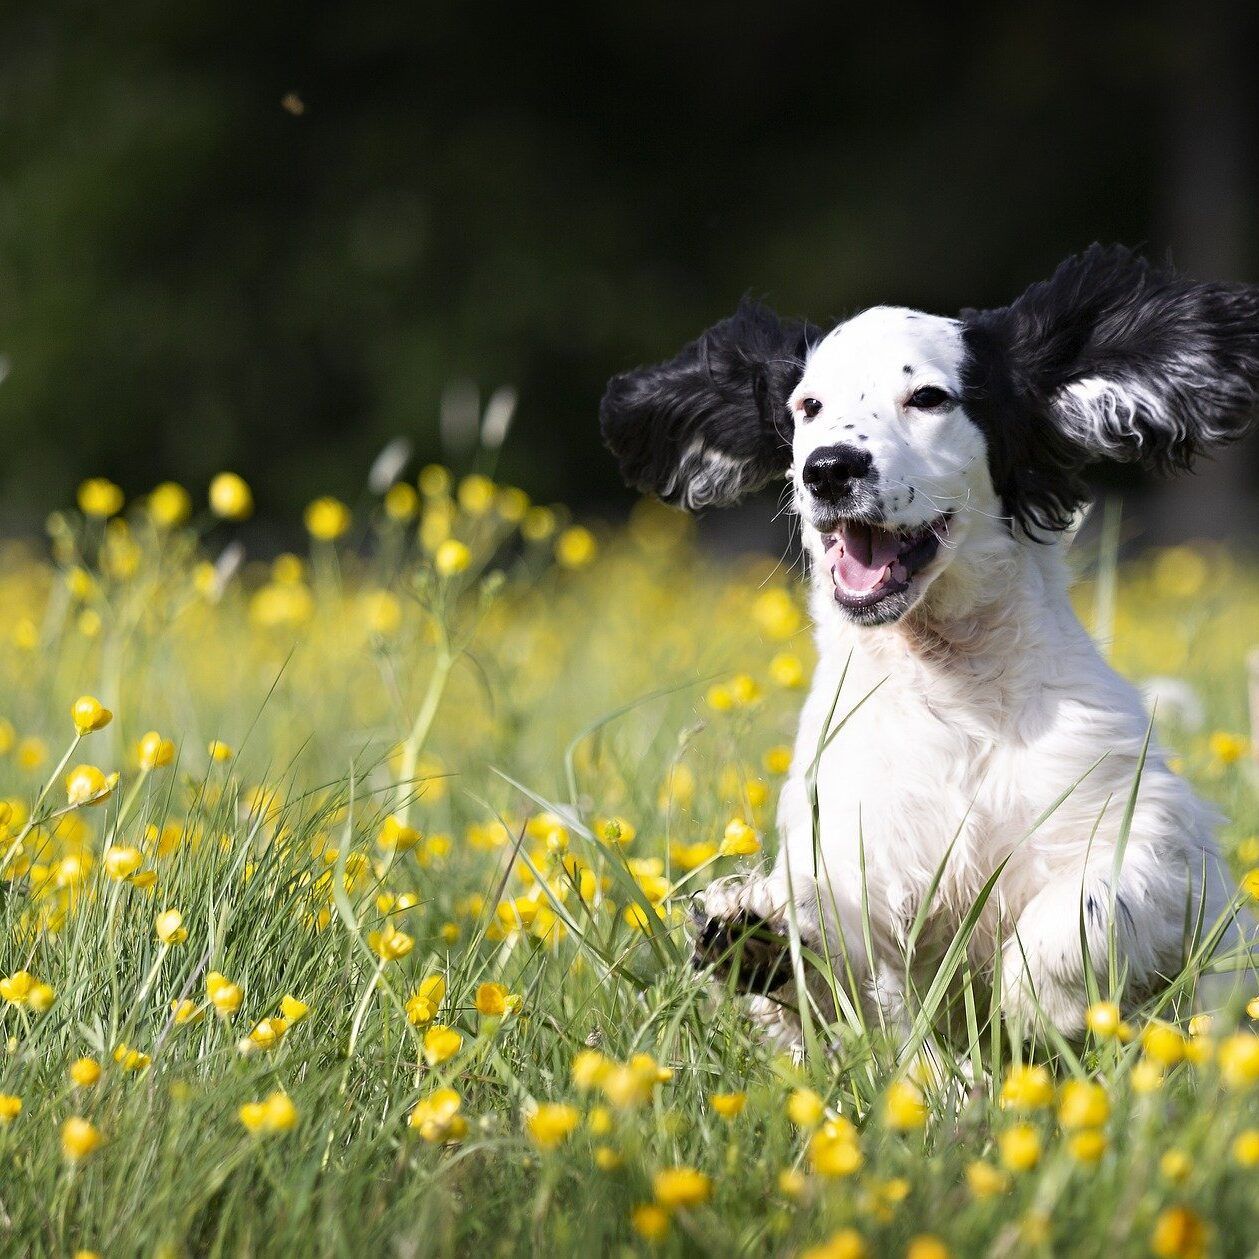 English Setter recall training in a field